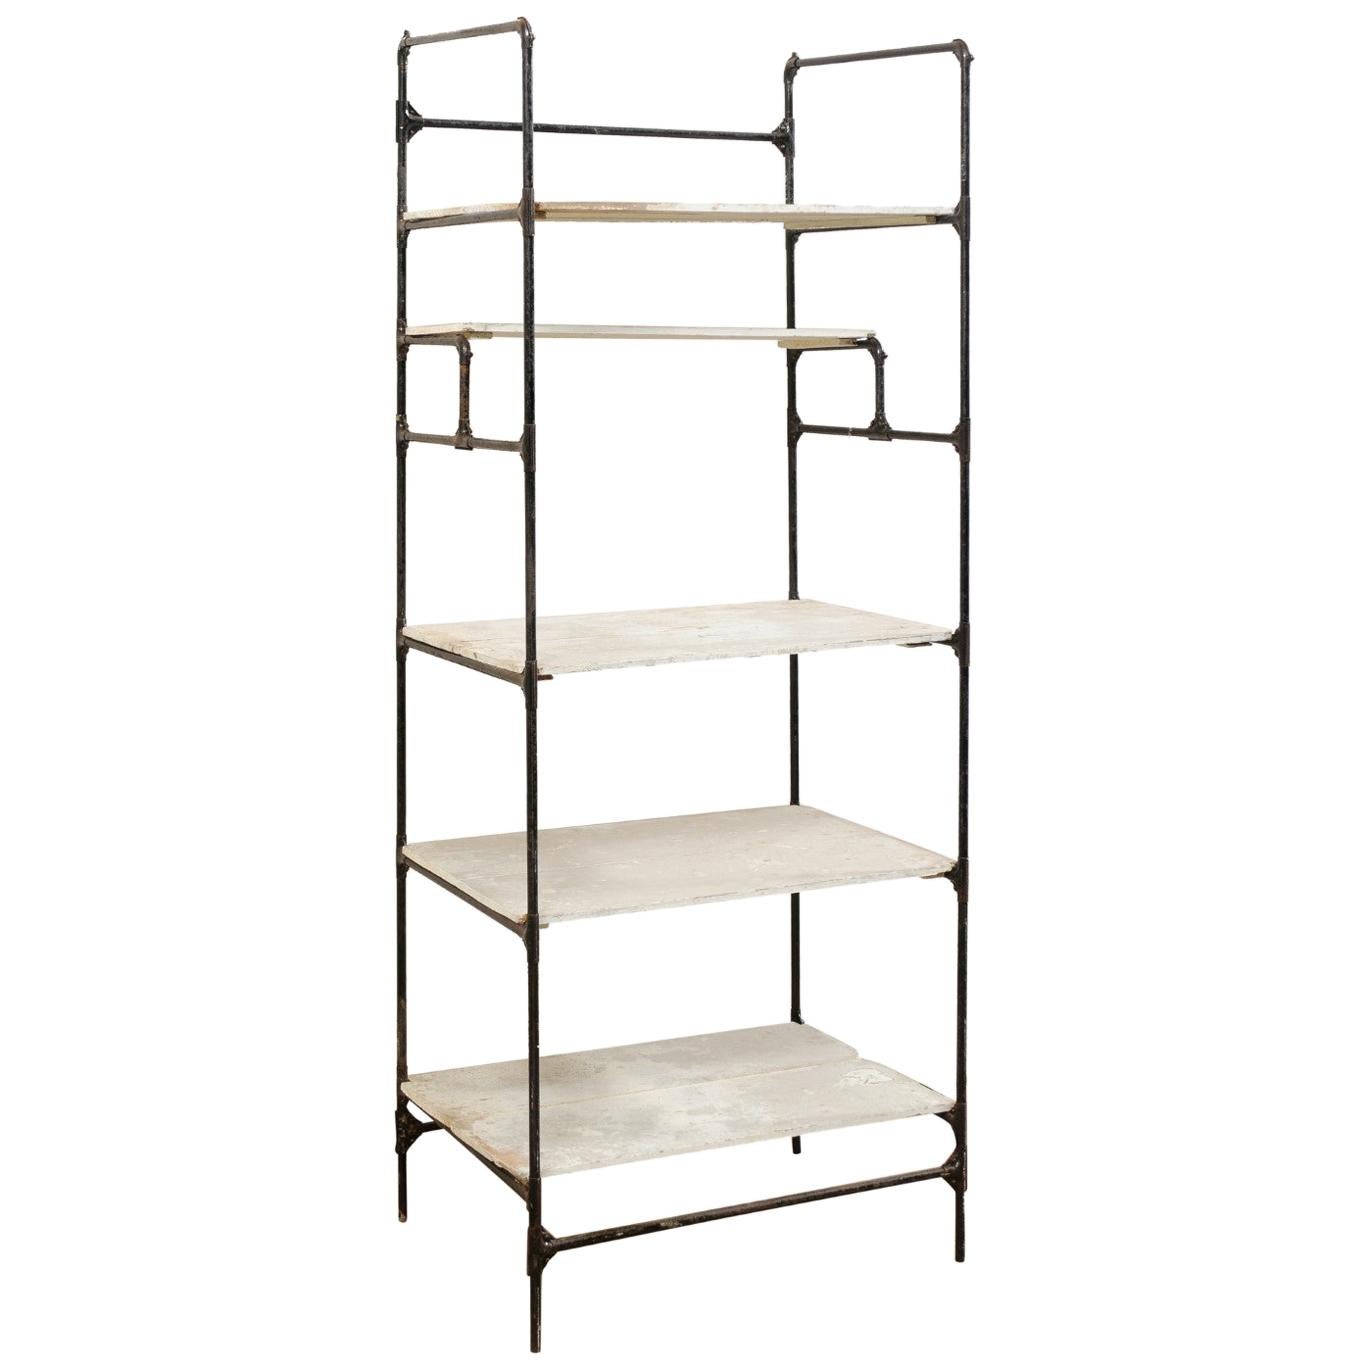 A Tall Spanish Open Shelf Rack Storage Display Piece, Vintage Artisan Created For Sale